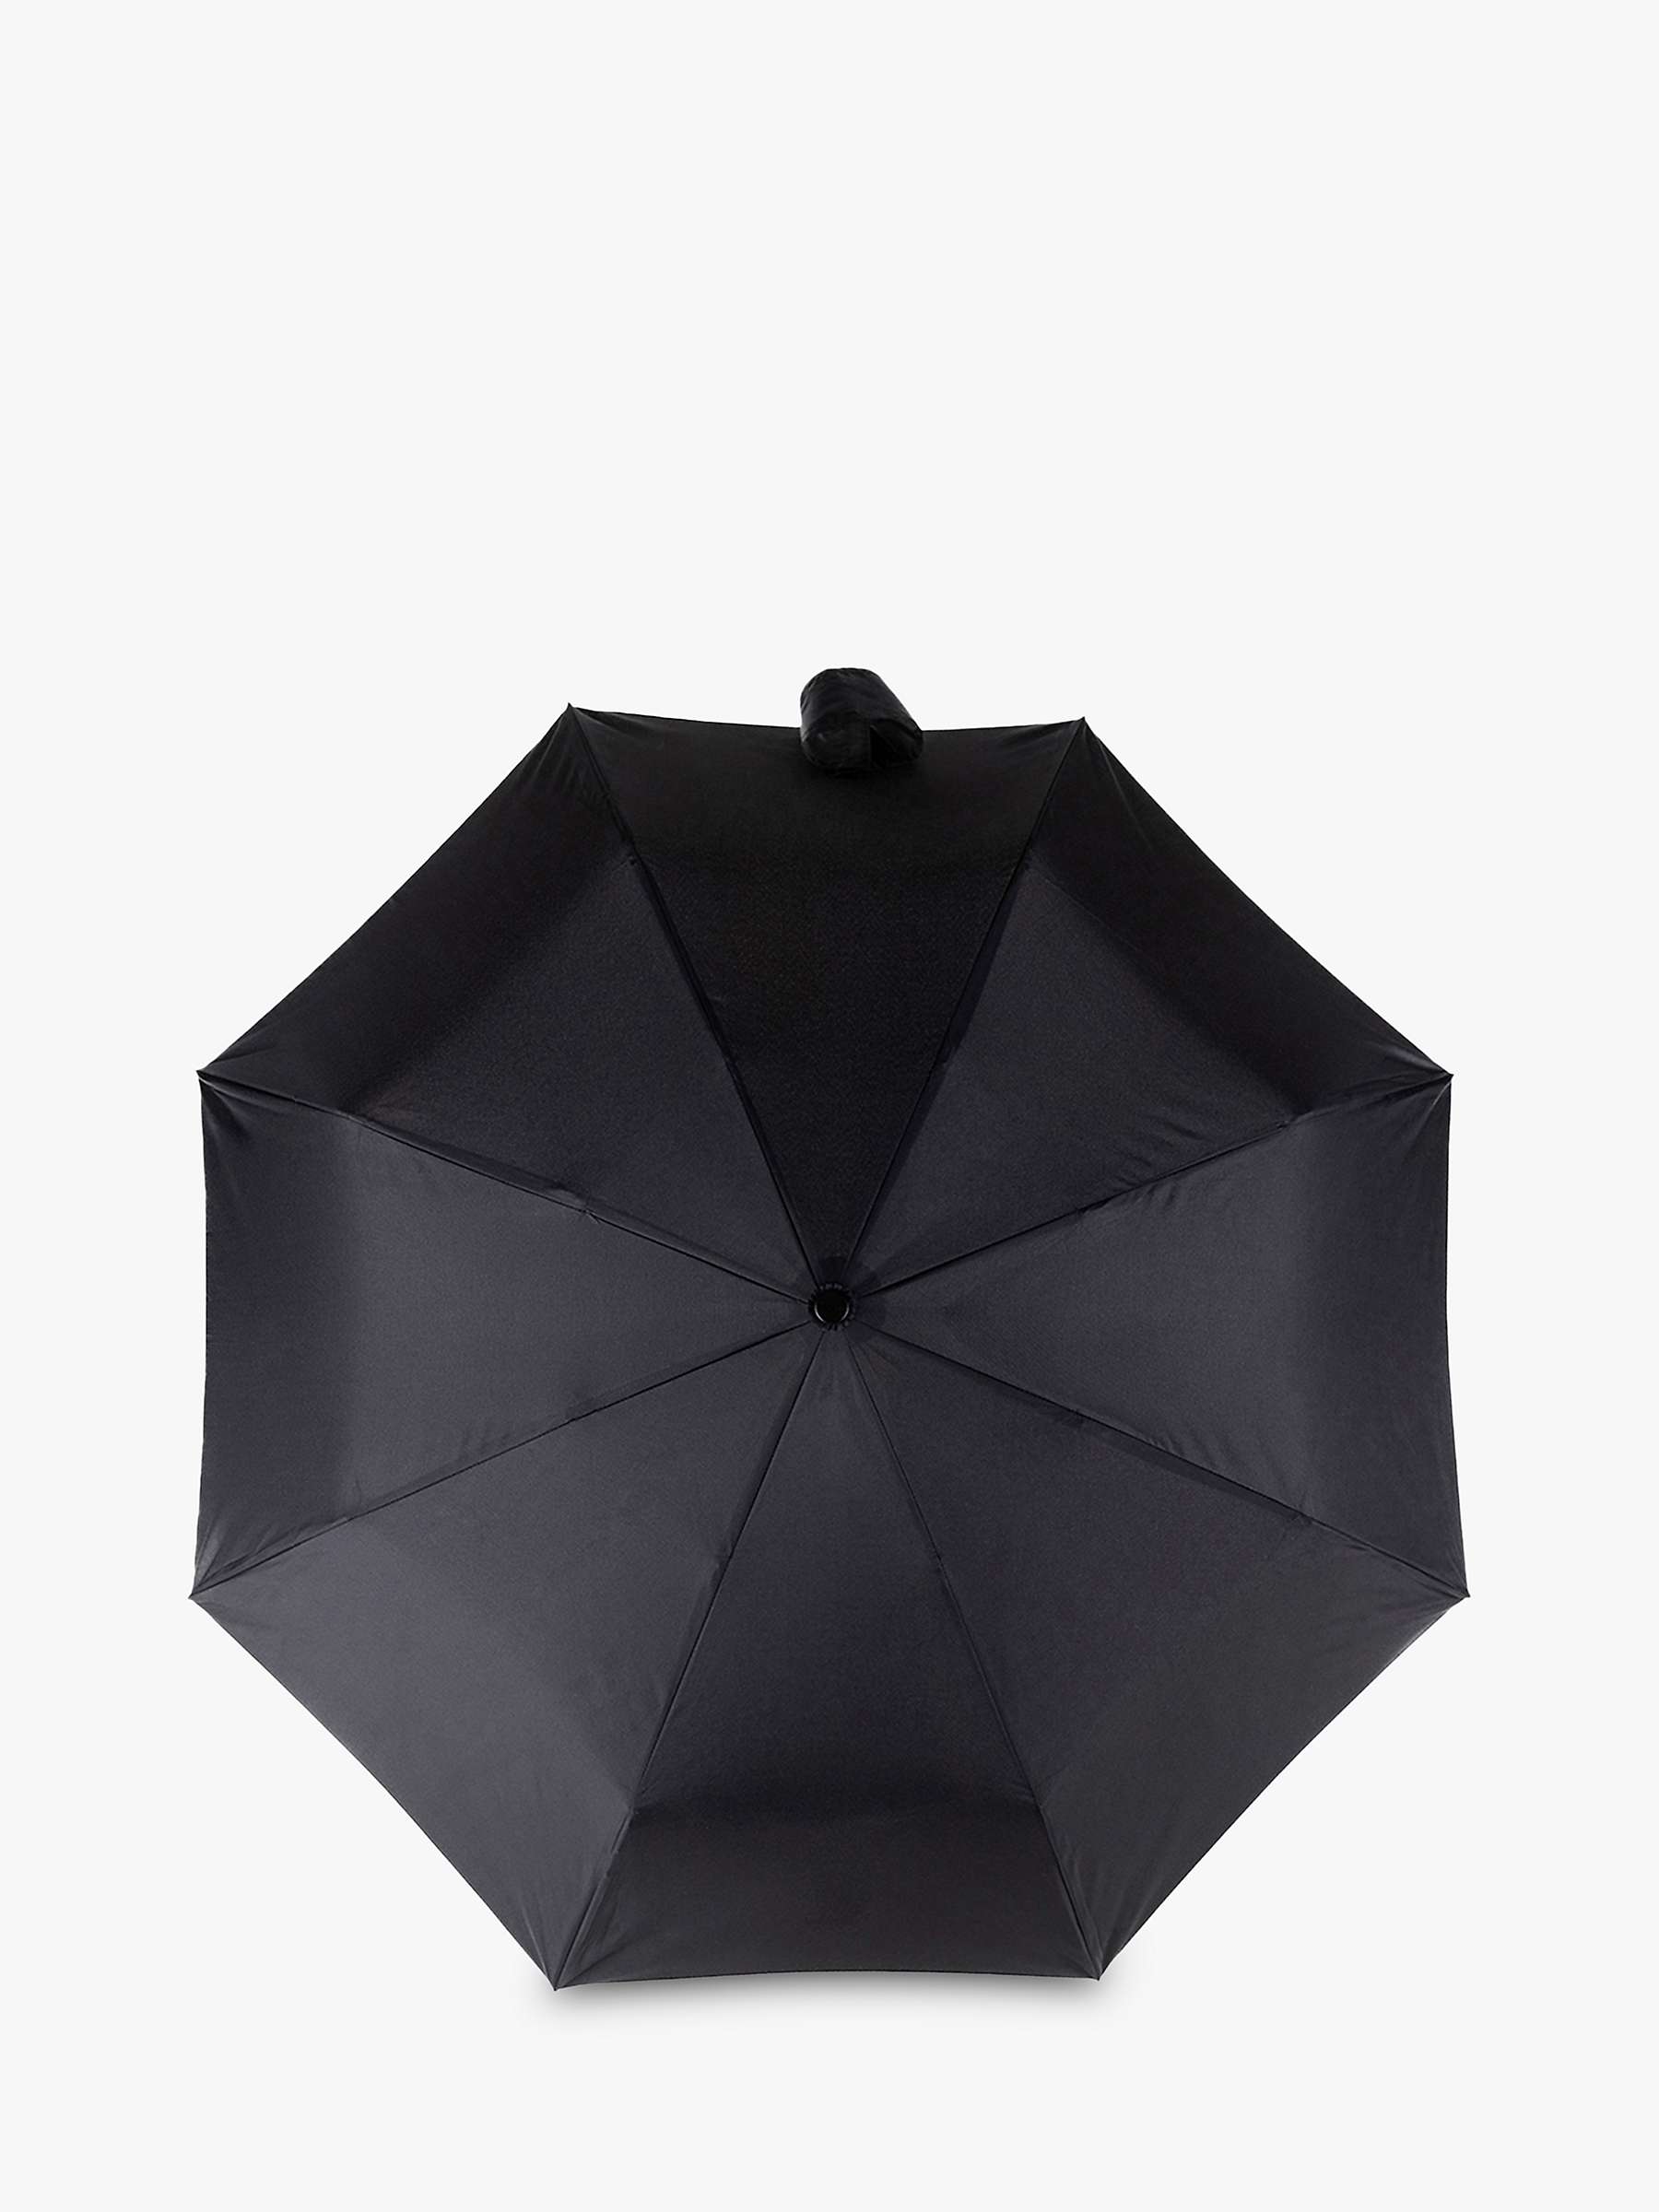 Buy totes Men's Gloves And X-tra Strong Umbrella Gift Set Online at johnlewis.com